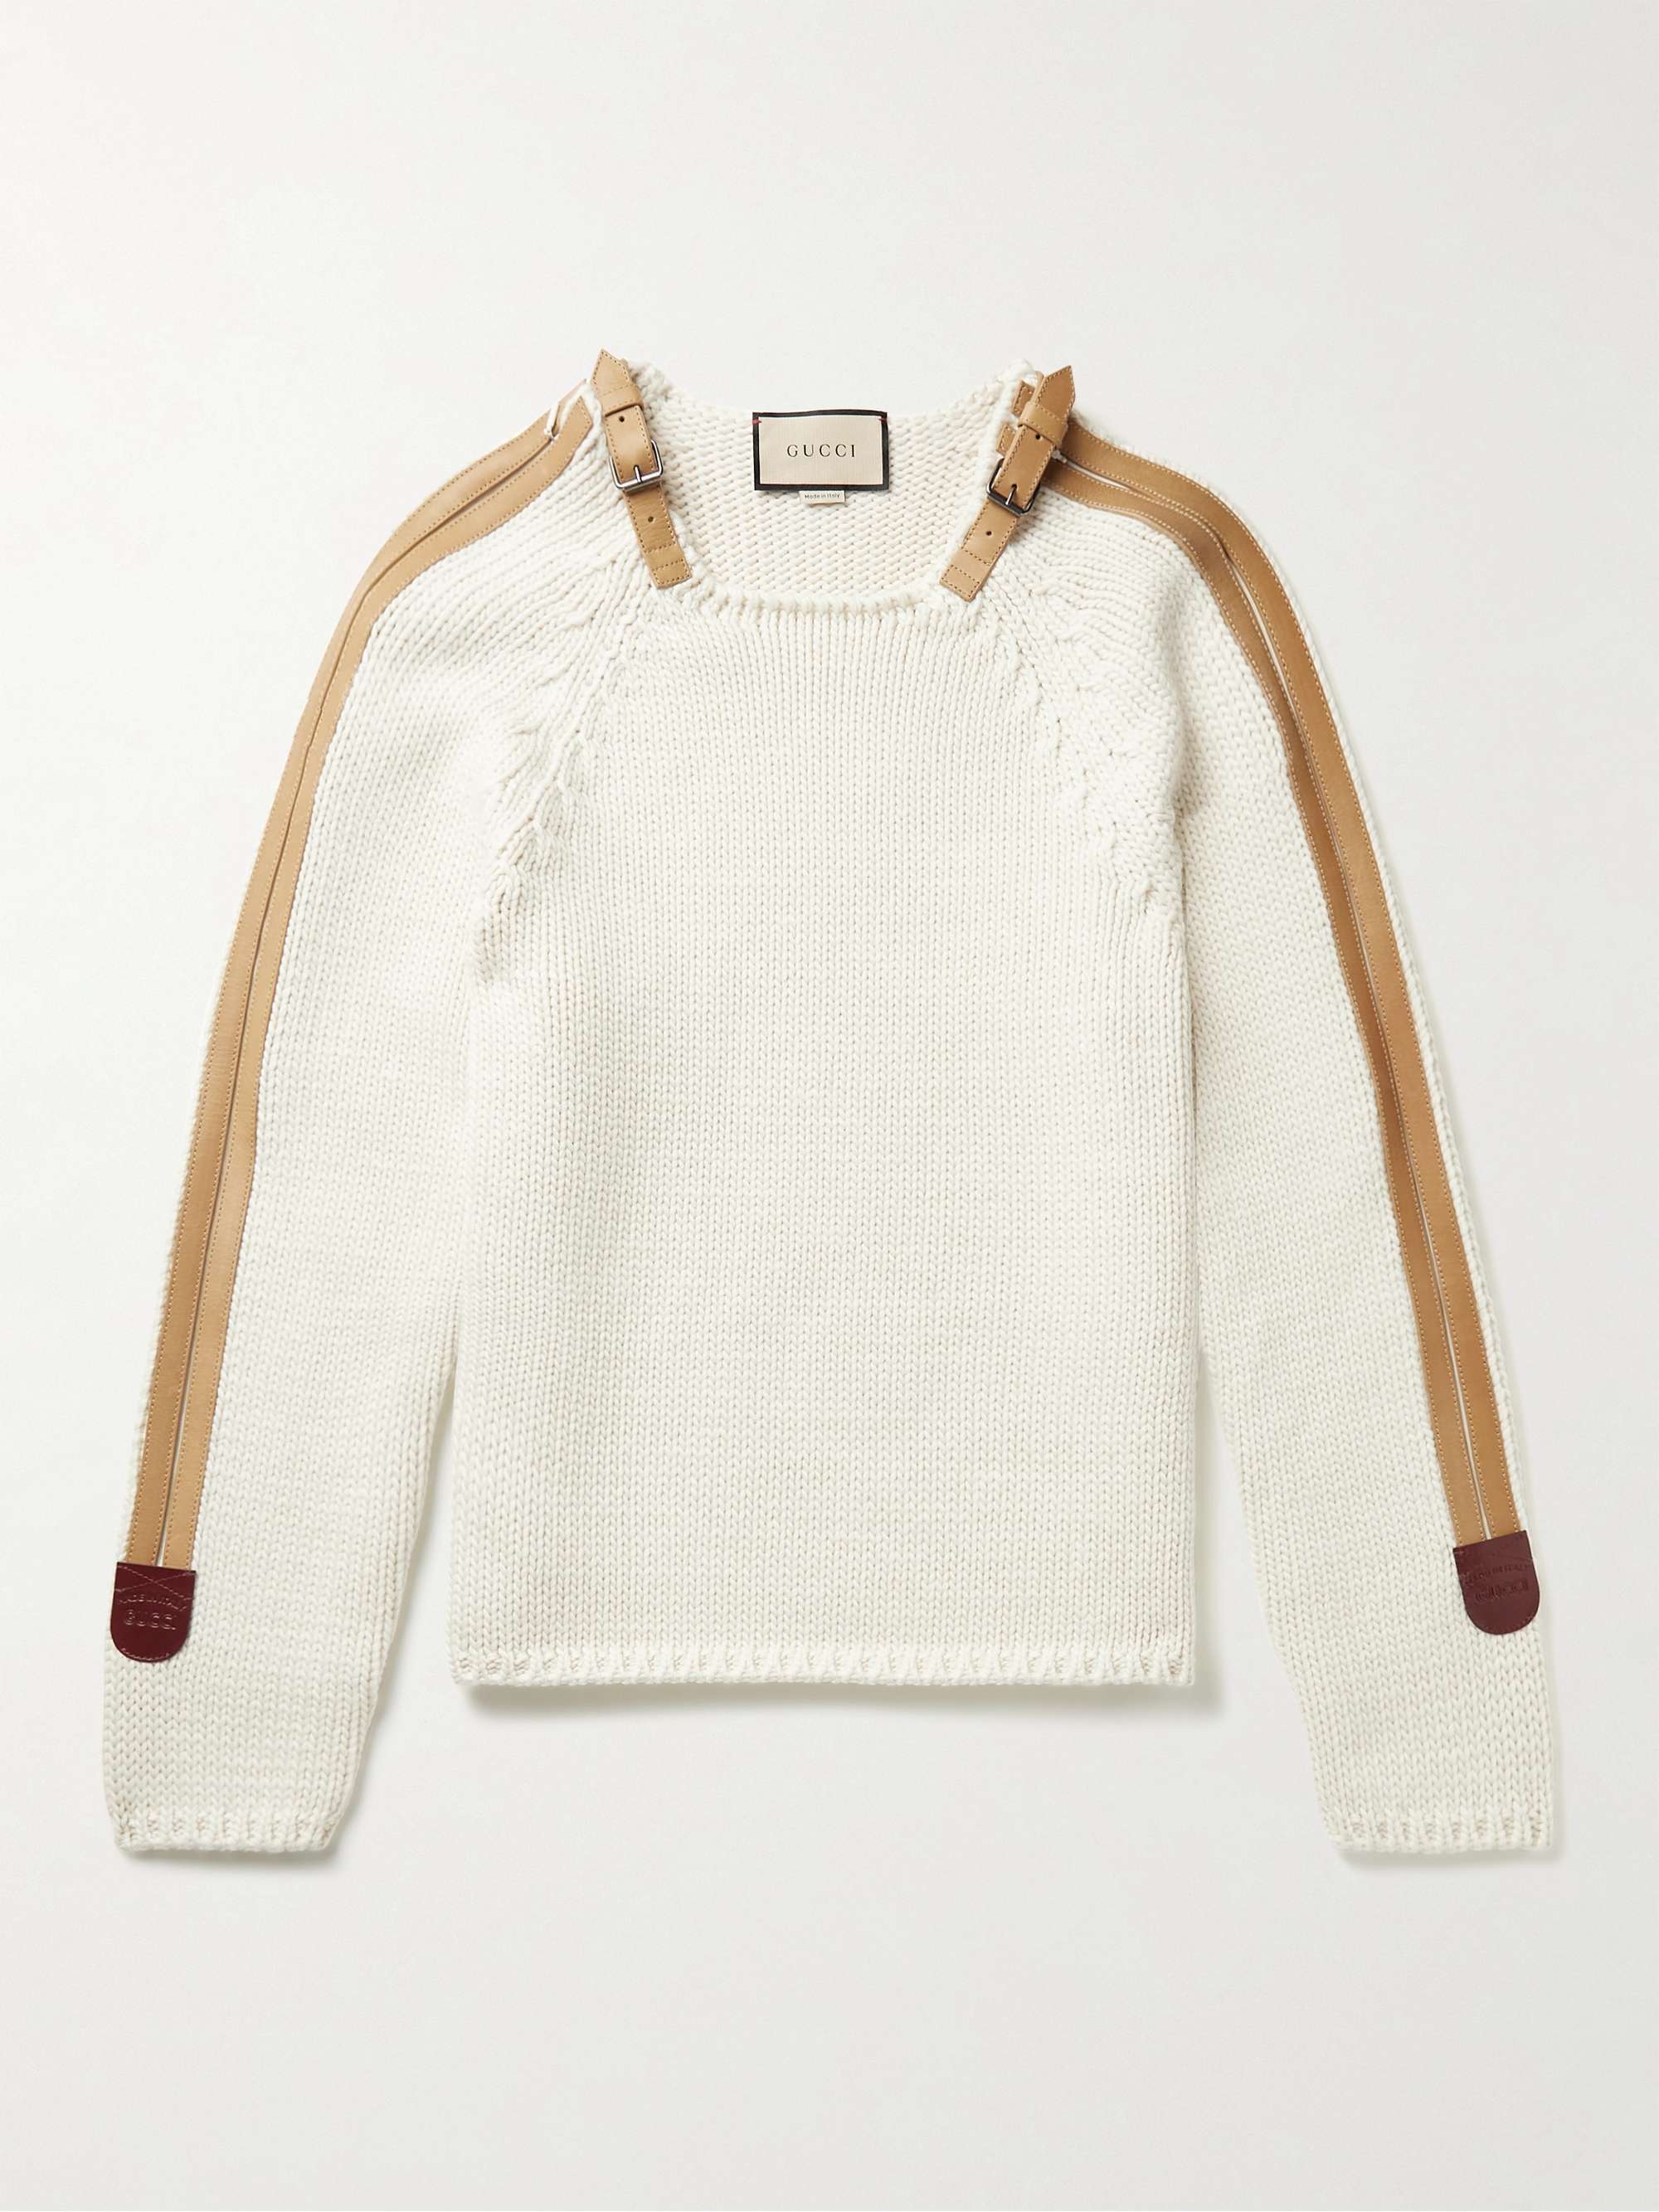 GUCCI Leather-Trimmed Wool Sweater